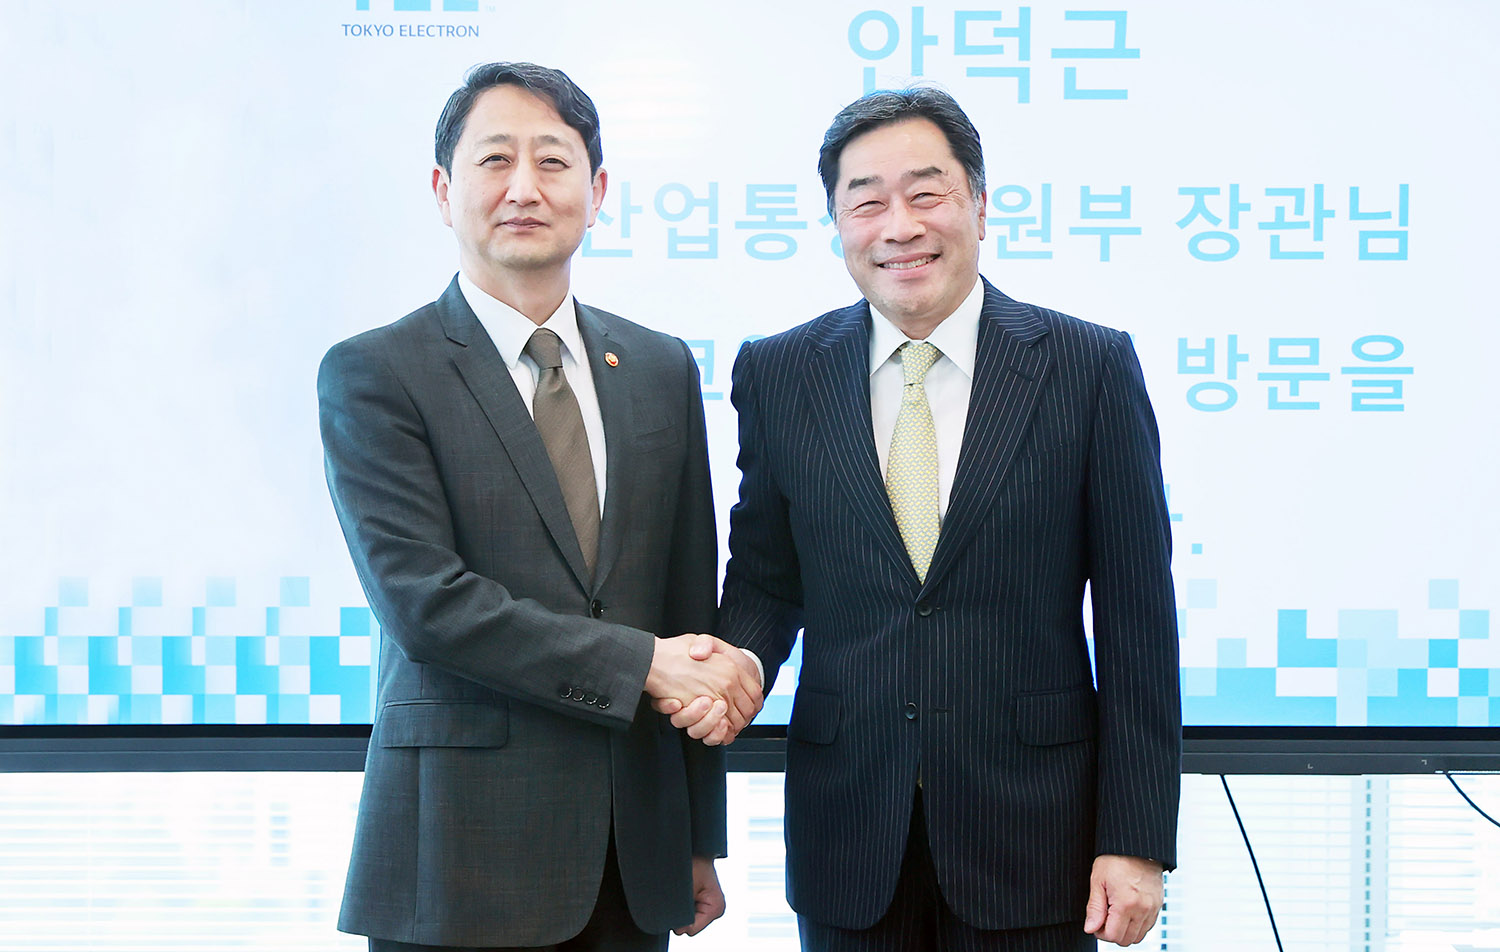 Minister Ahn meets with Tokyo Electron CEO